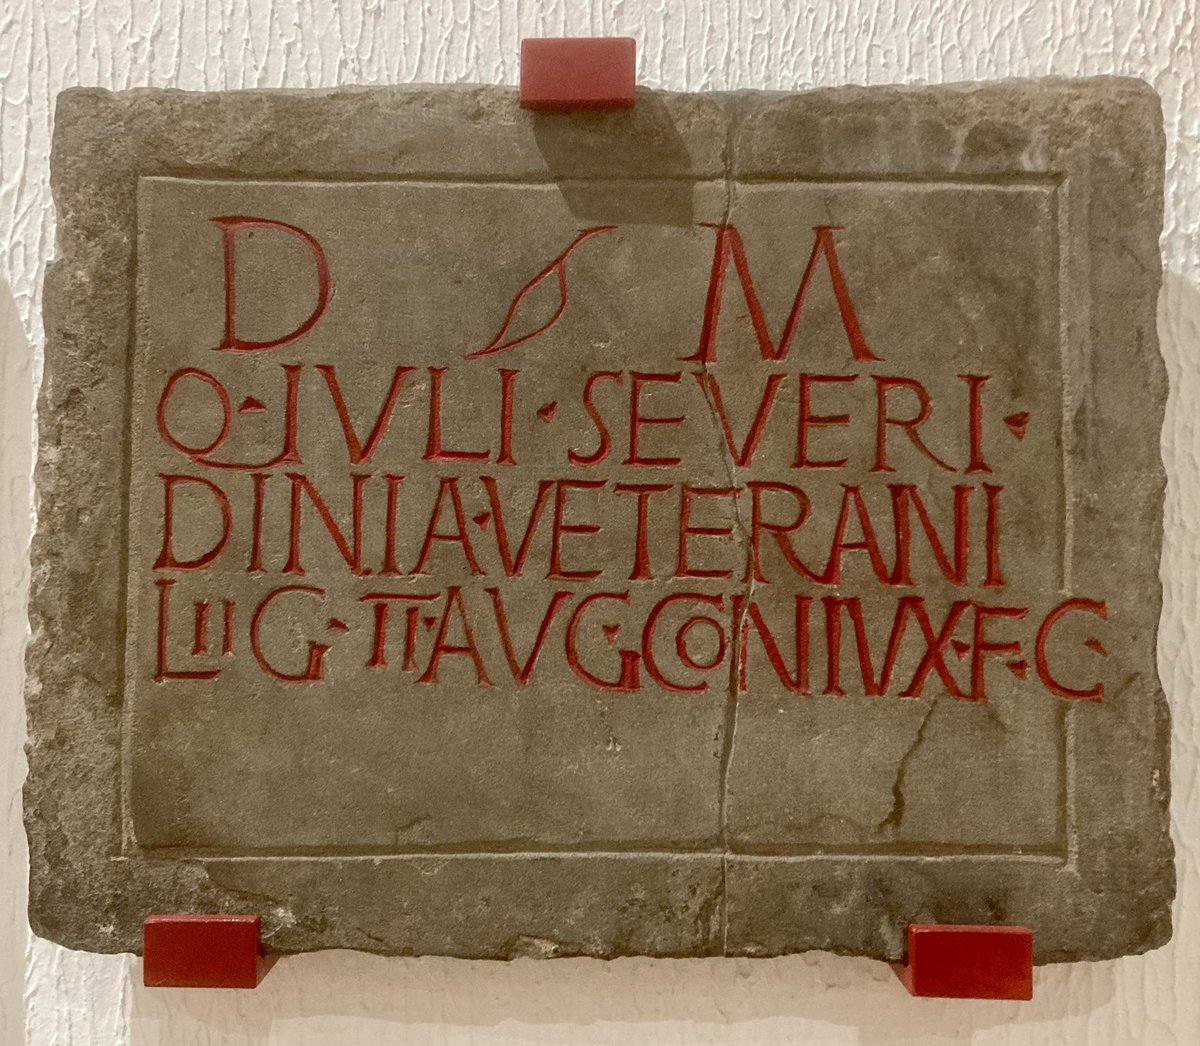 Tombstone of Quintus Julius Severus from @RomanCaerleon Severus retired with the privileges and status of a veteran, and settled close to the fortress. His original home was Dinia in Gaul, now Digne in south-east France 1/2 #TombTuesday #RomanArchaeology #Isca #Caerleon #Wales